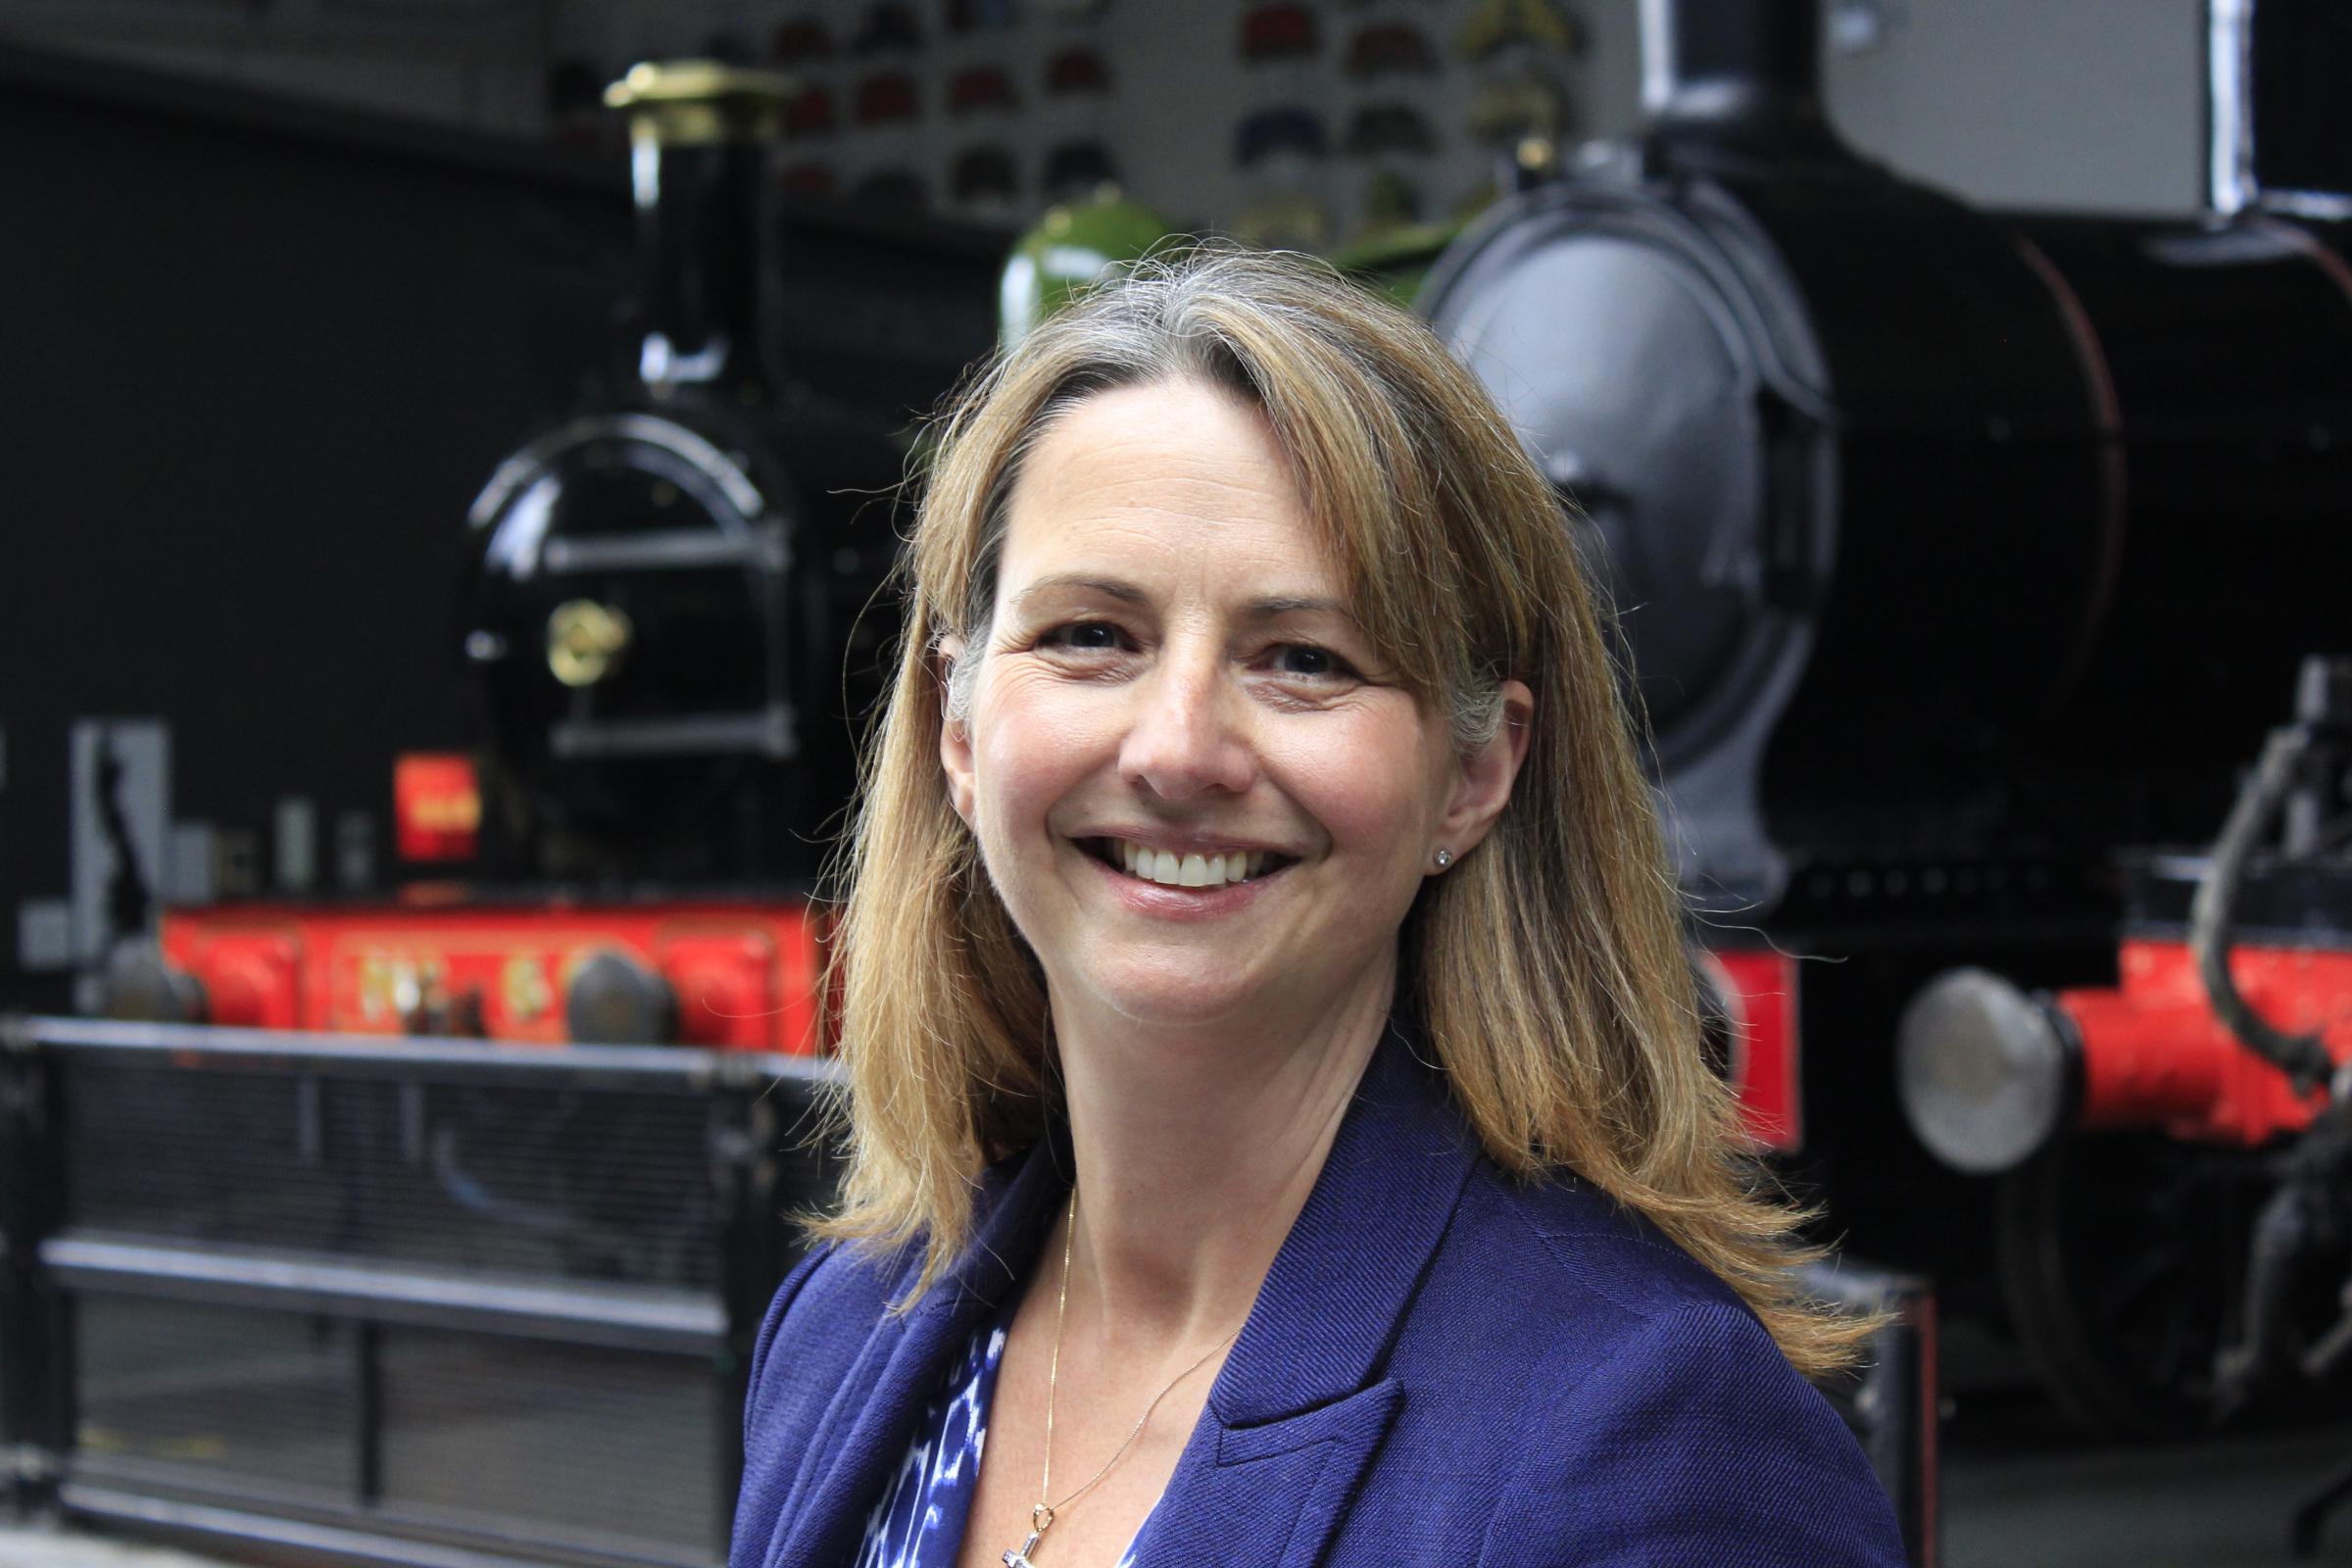 Rail museum appoints director to lead £50m fundraising drive